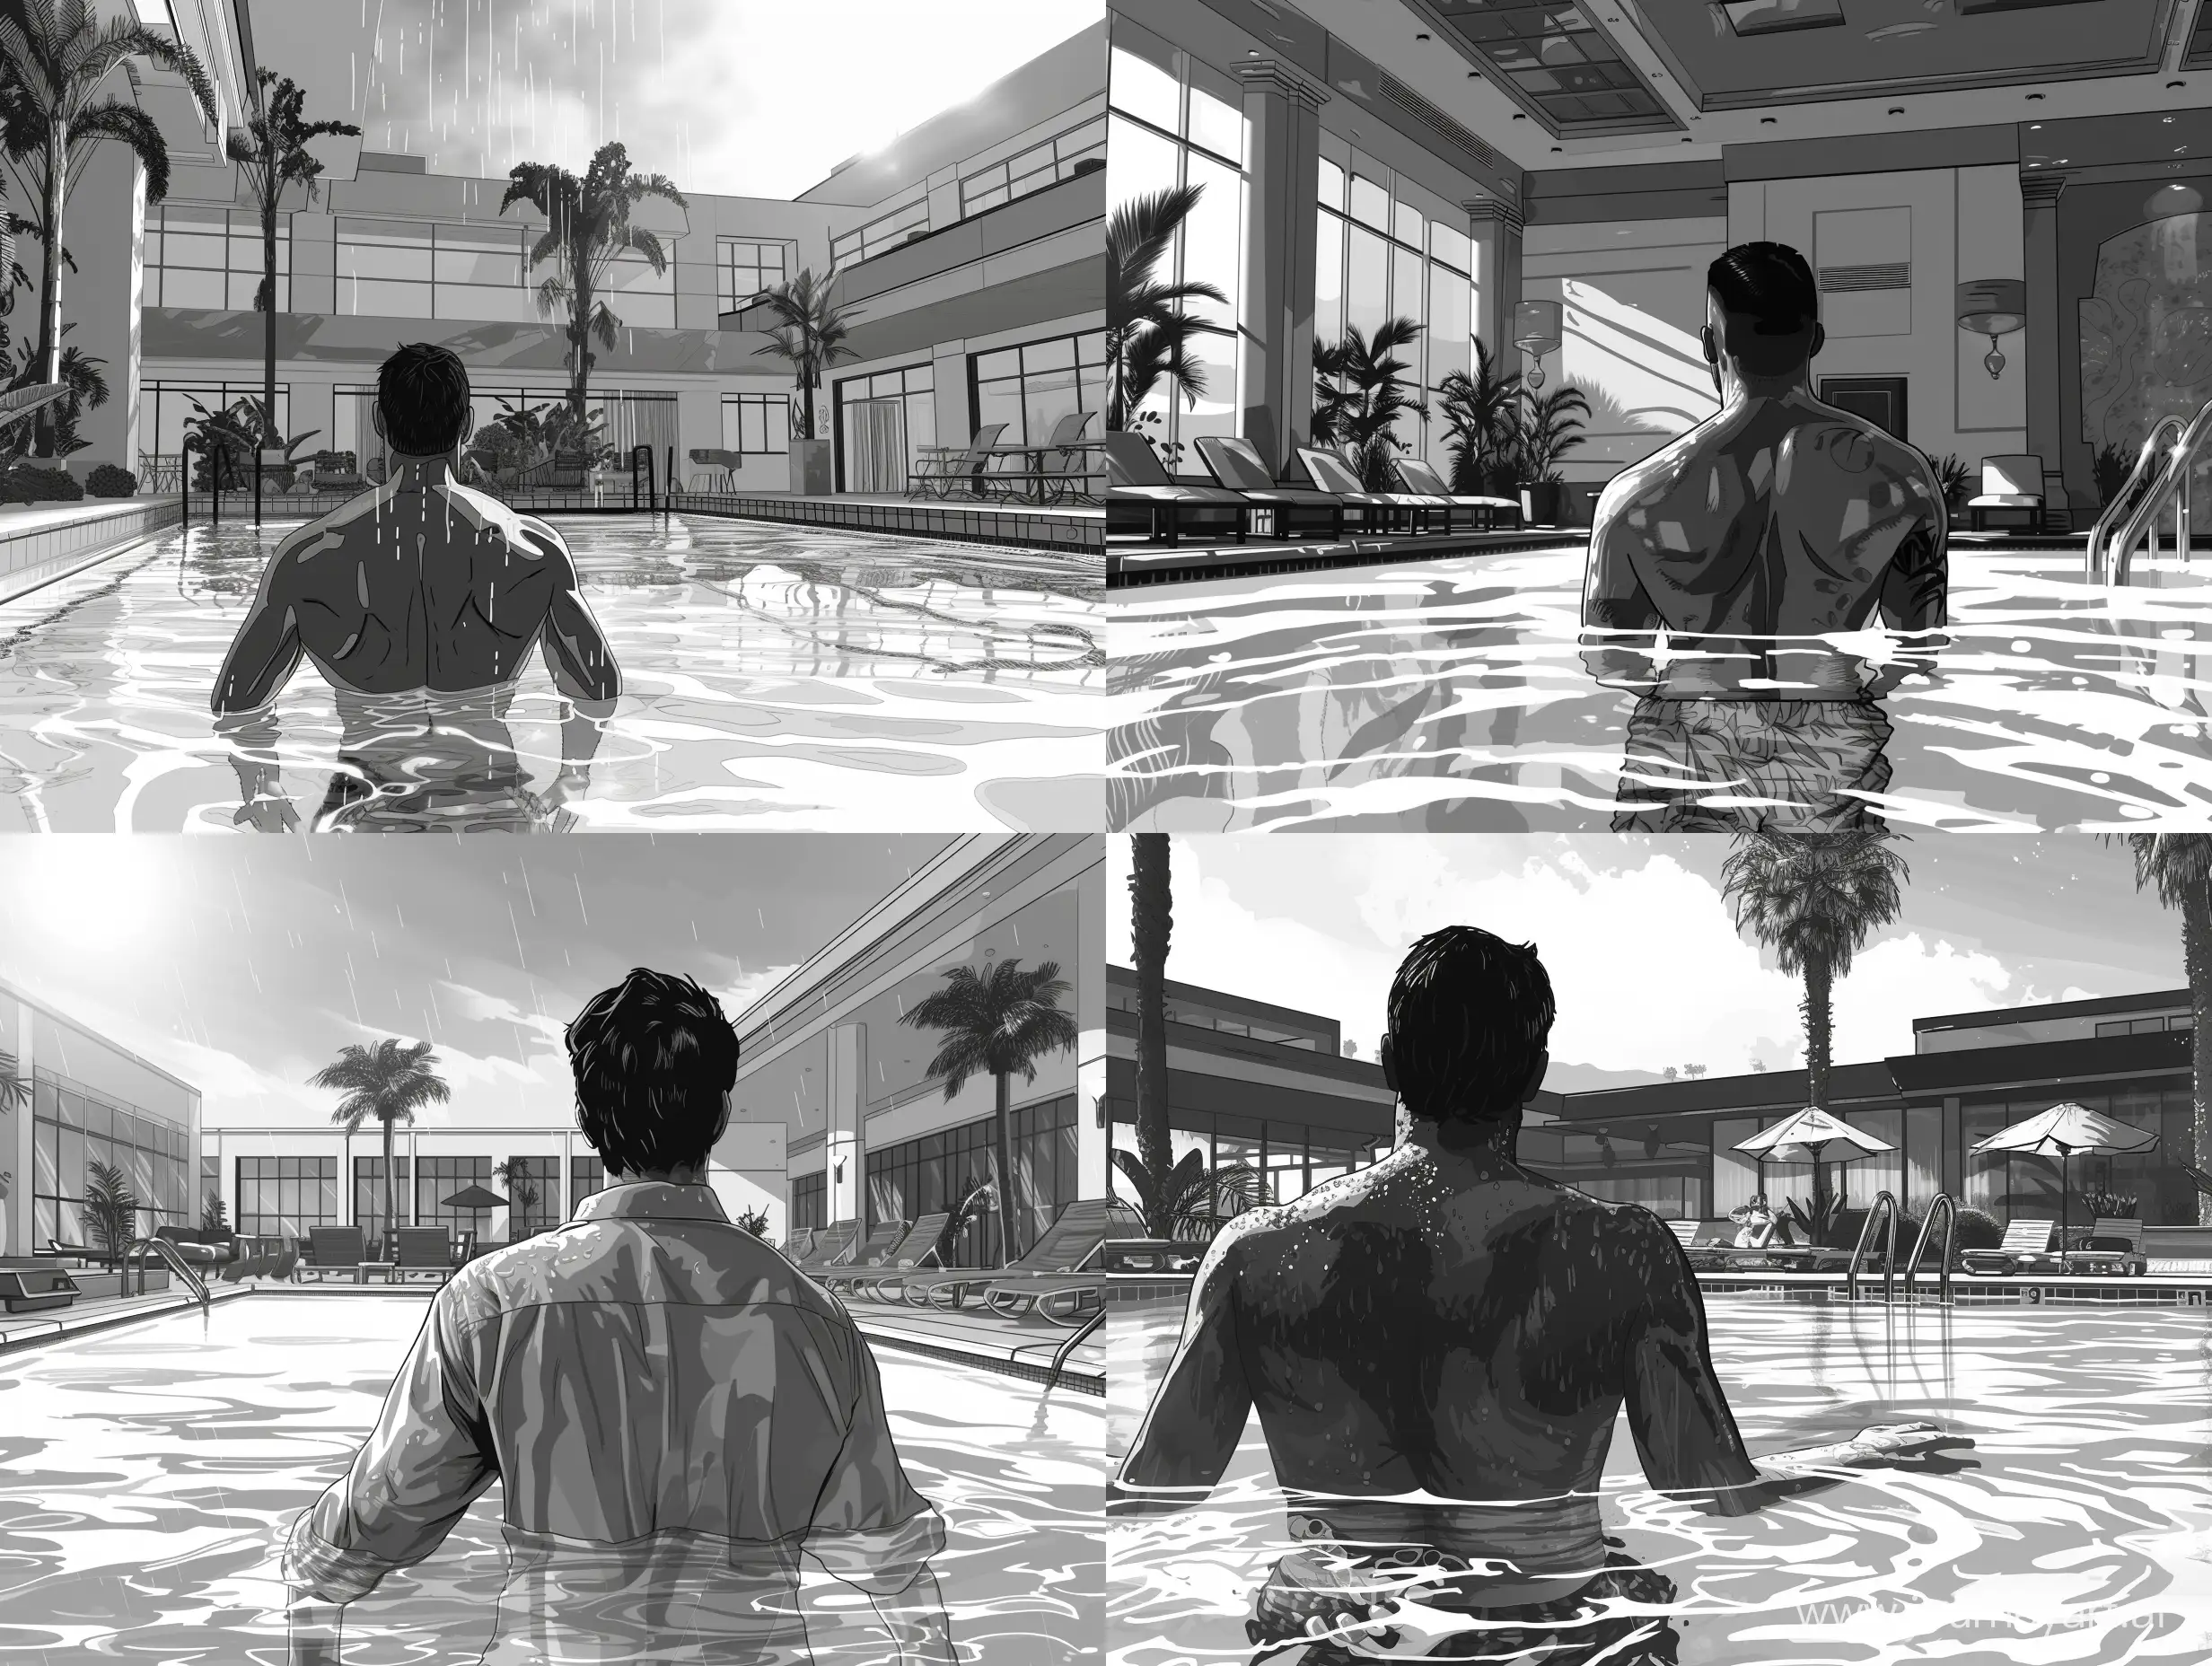 wealthy man in swimming pool, behind his back, hotel interior, grand theft auto artstyle, loading screen, celshading, highly detailed, black and white only.